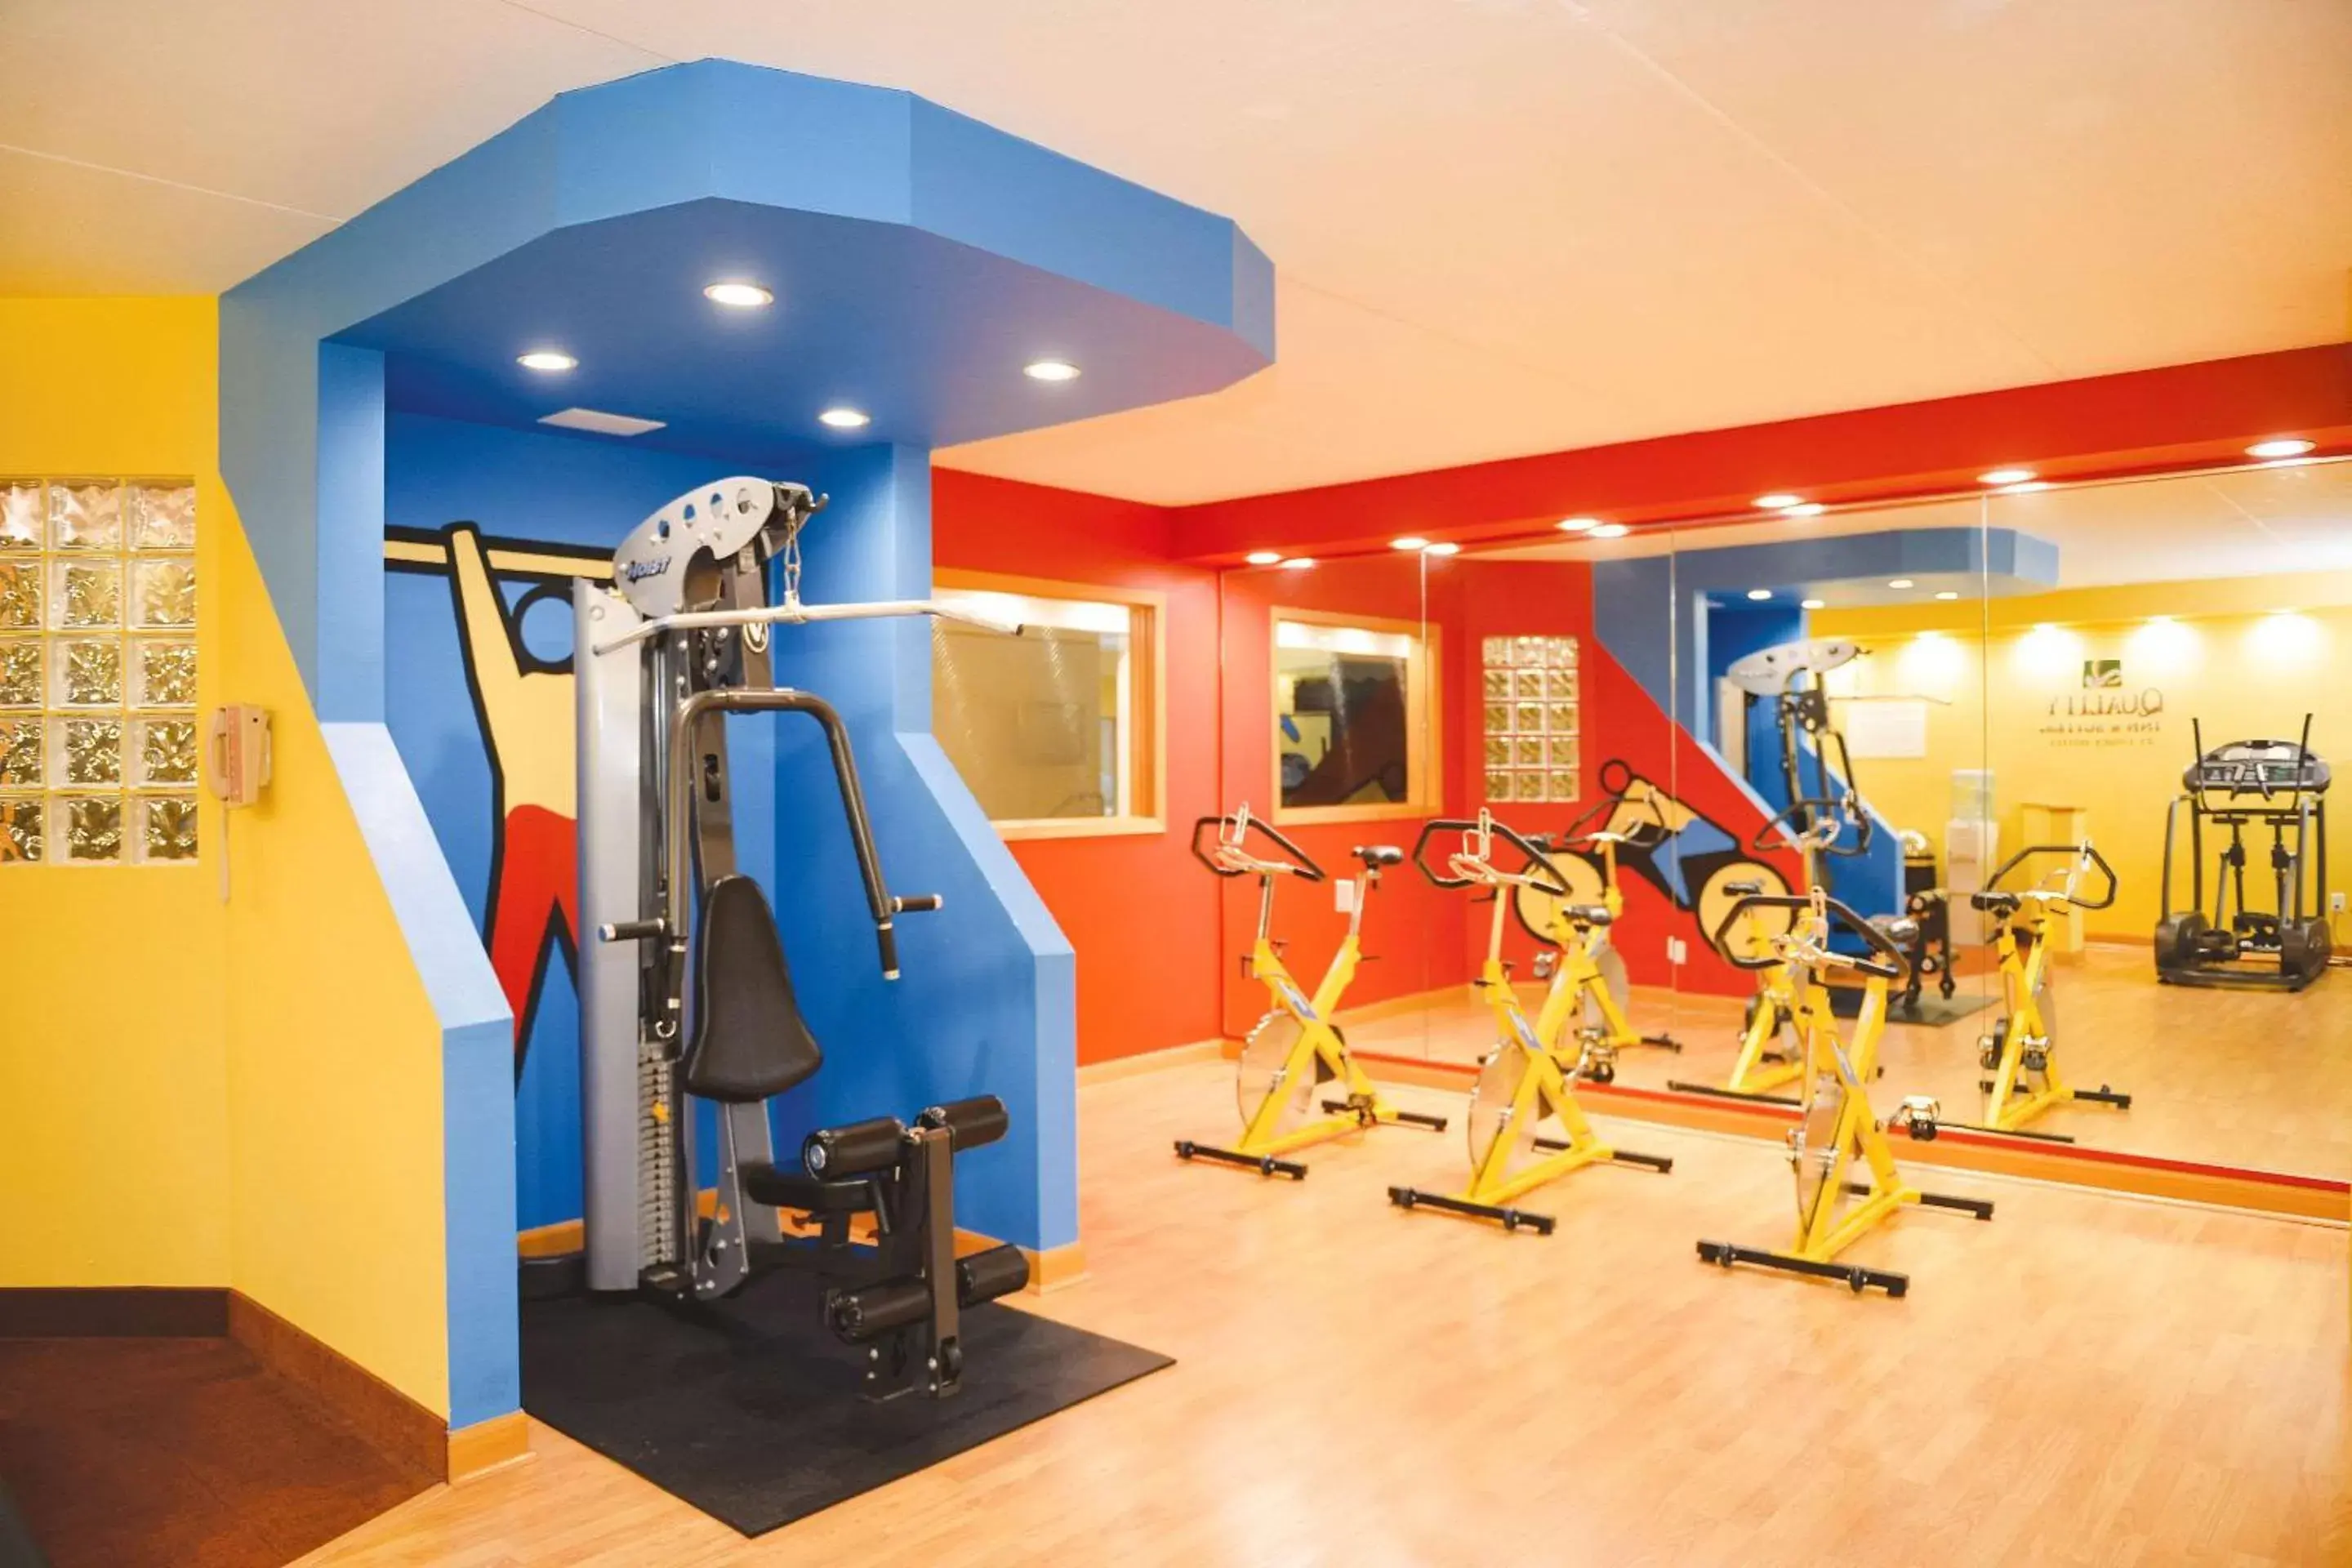 Fitness centre/facilities, Fitness Center/Facilities in Quality Inn & Suites Ames Conference Center Near ISU Campus